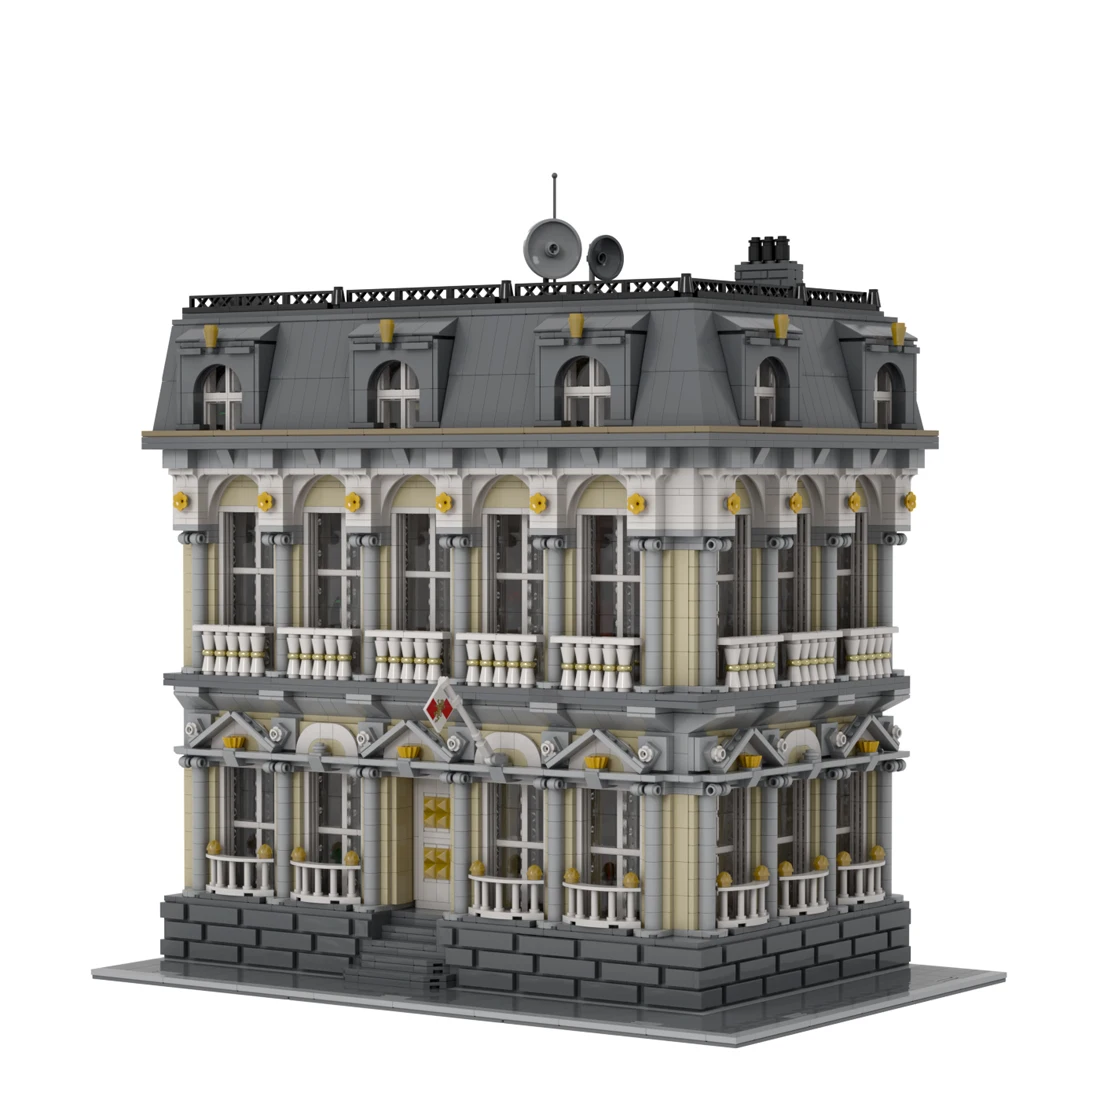 

8491Pcs MOC-76209 The Embassy Building DIY Architecture Building Blocks Toy (Licensed and Designed by Brickstyle City)